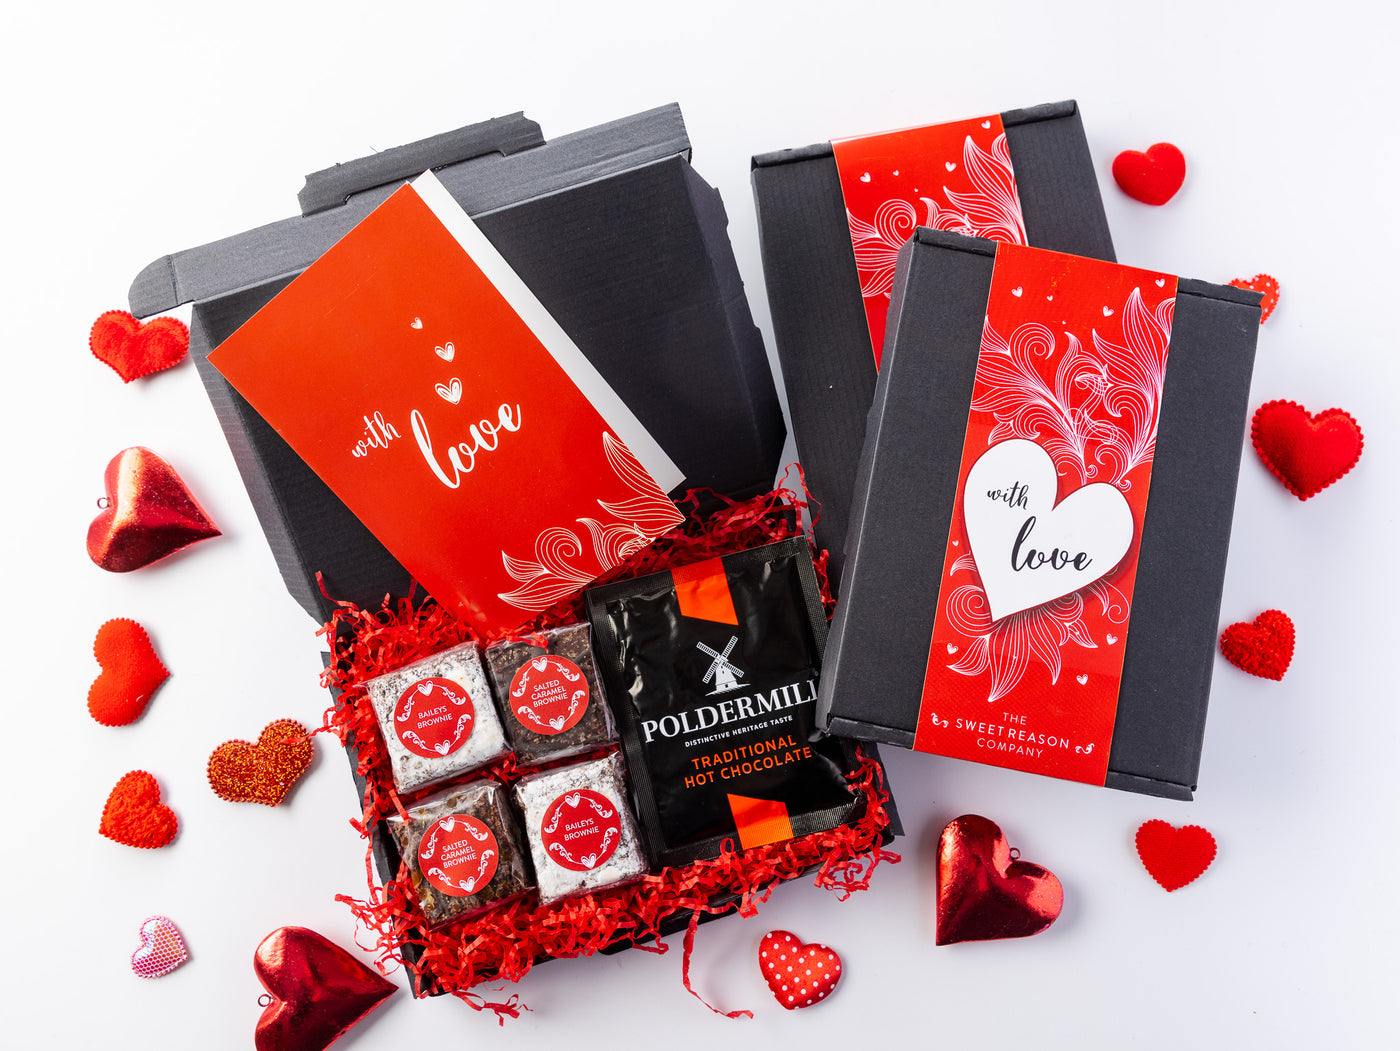 'With Love' Hot Chocolate and Brownies Valentine's Letterbox Gift